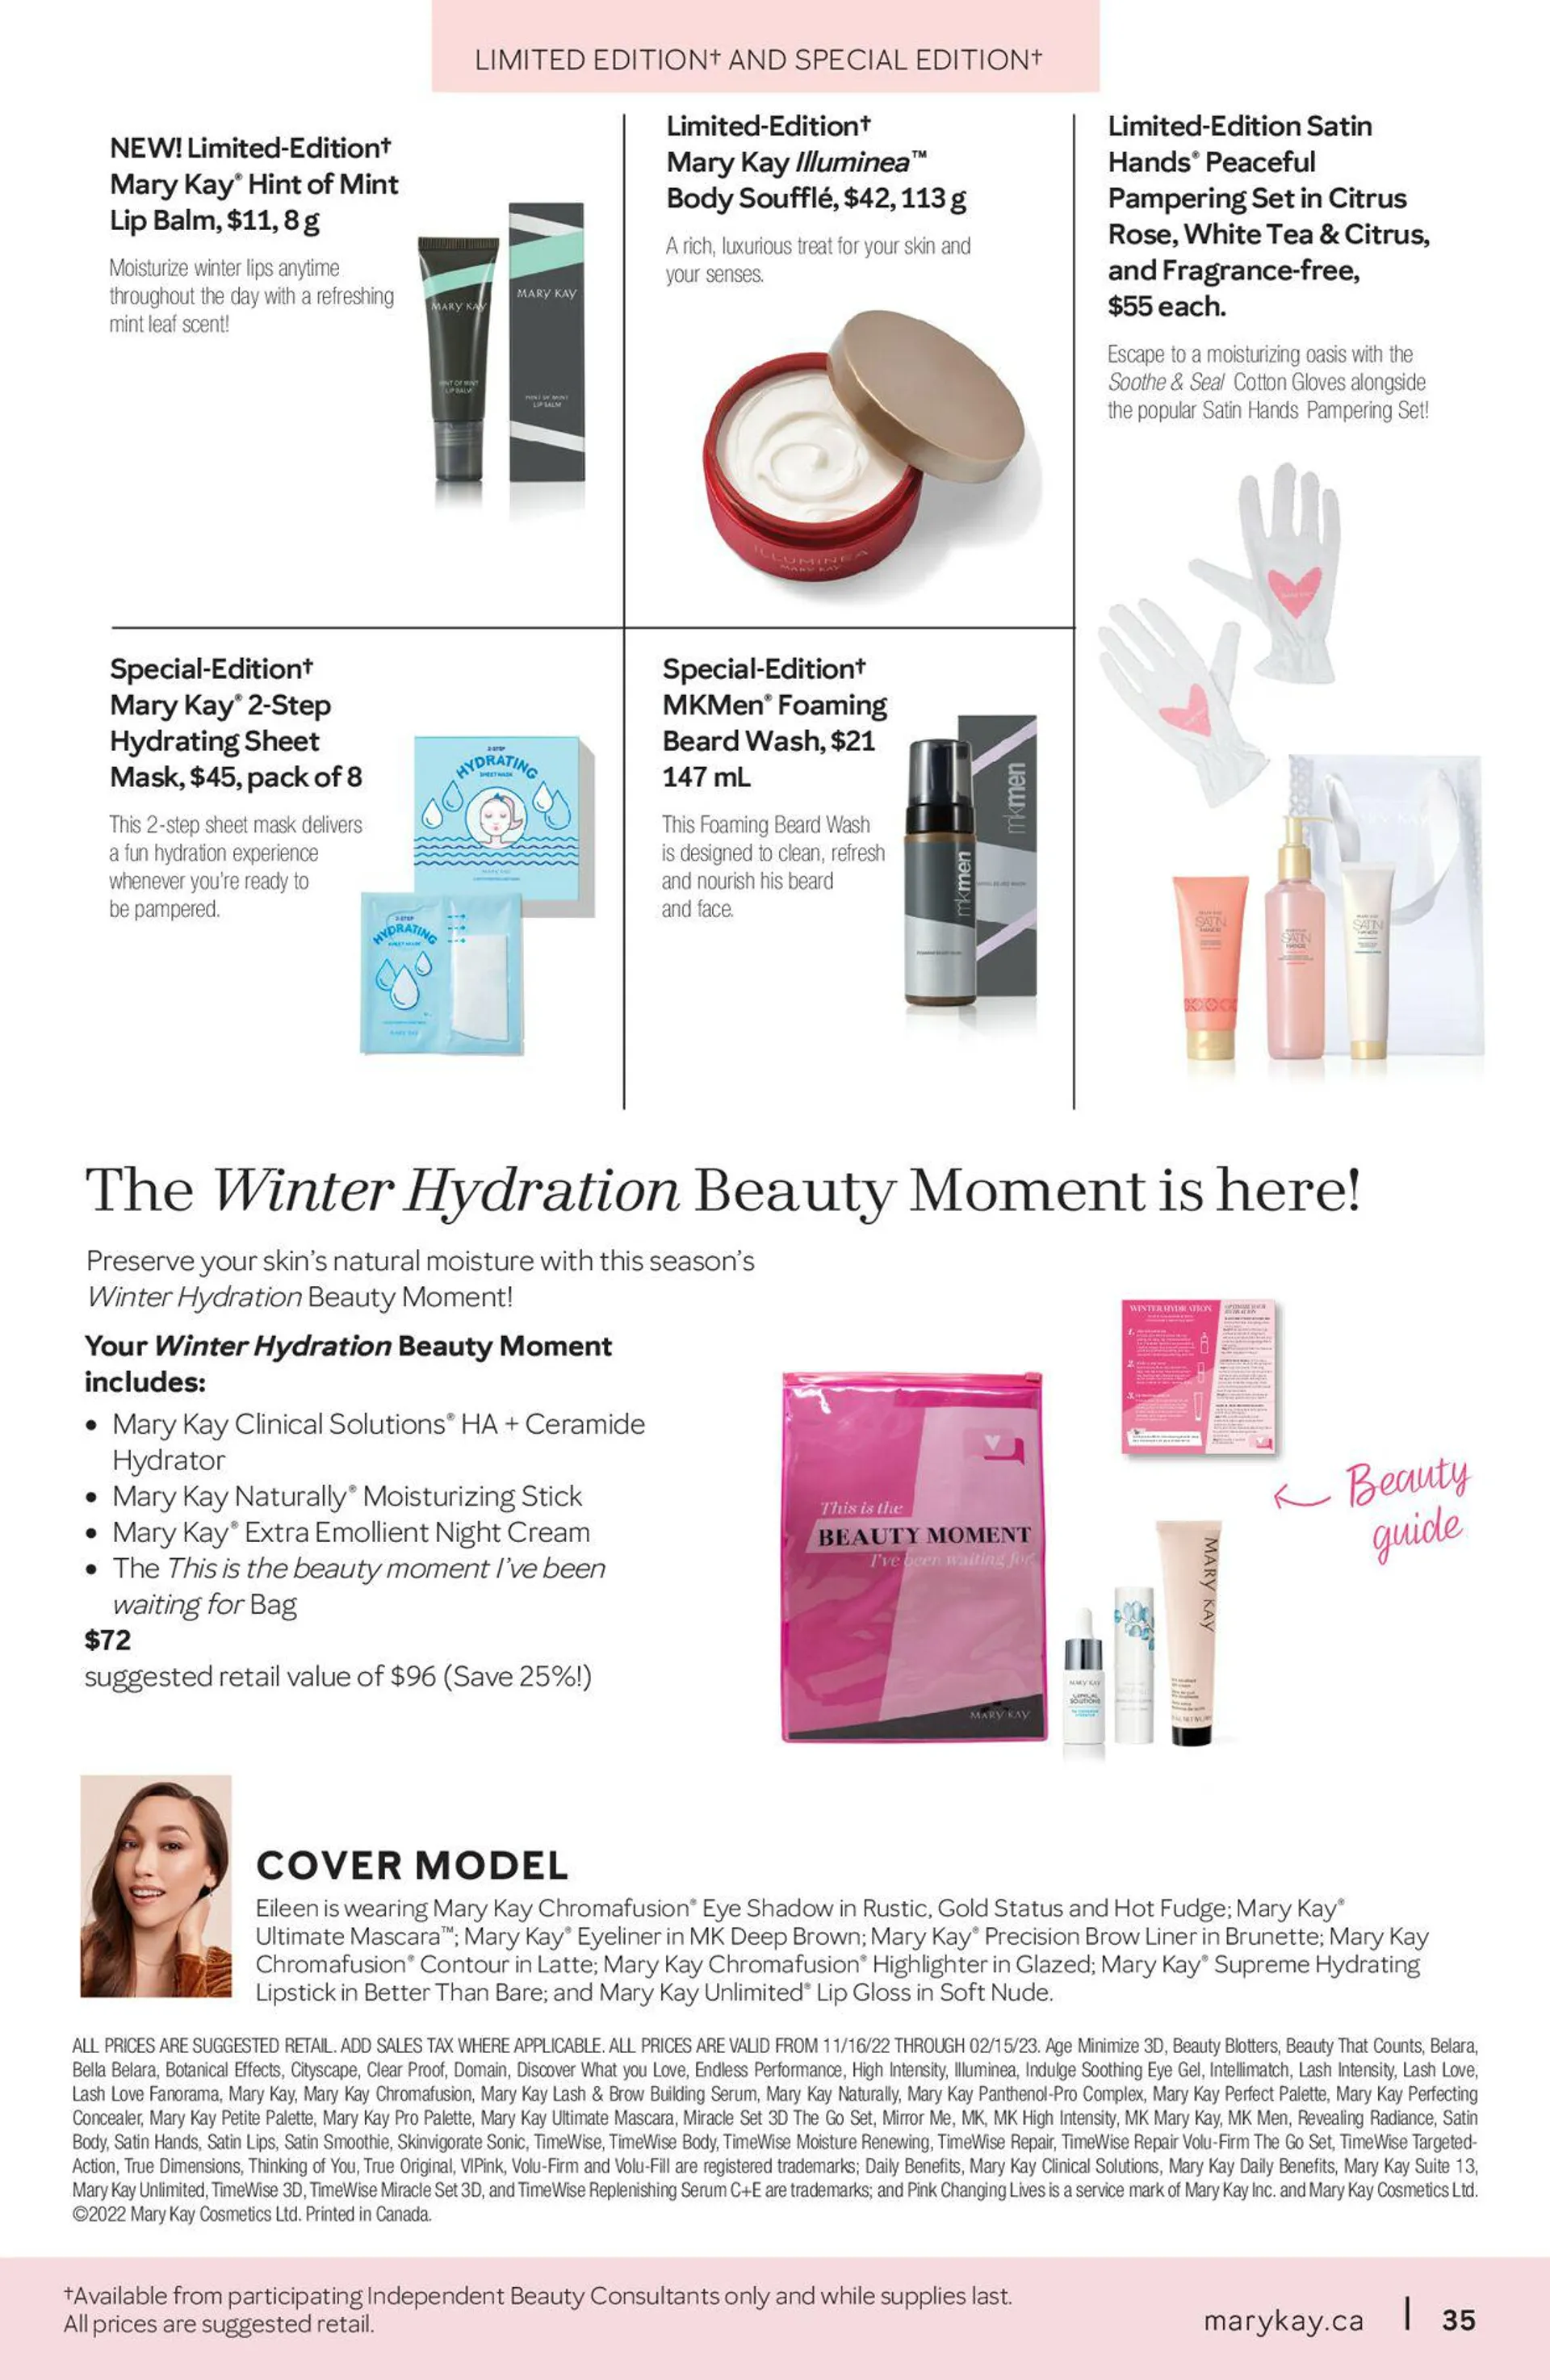 Mary Kay Current flyer - 35